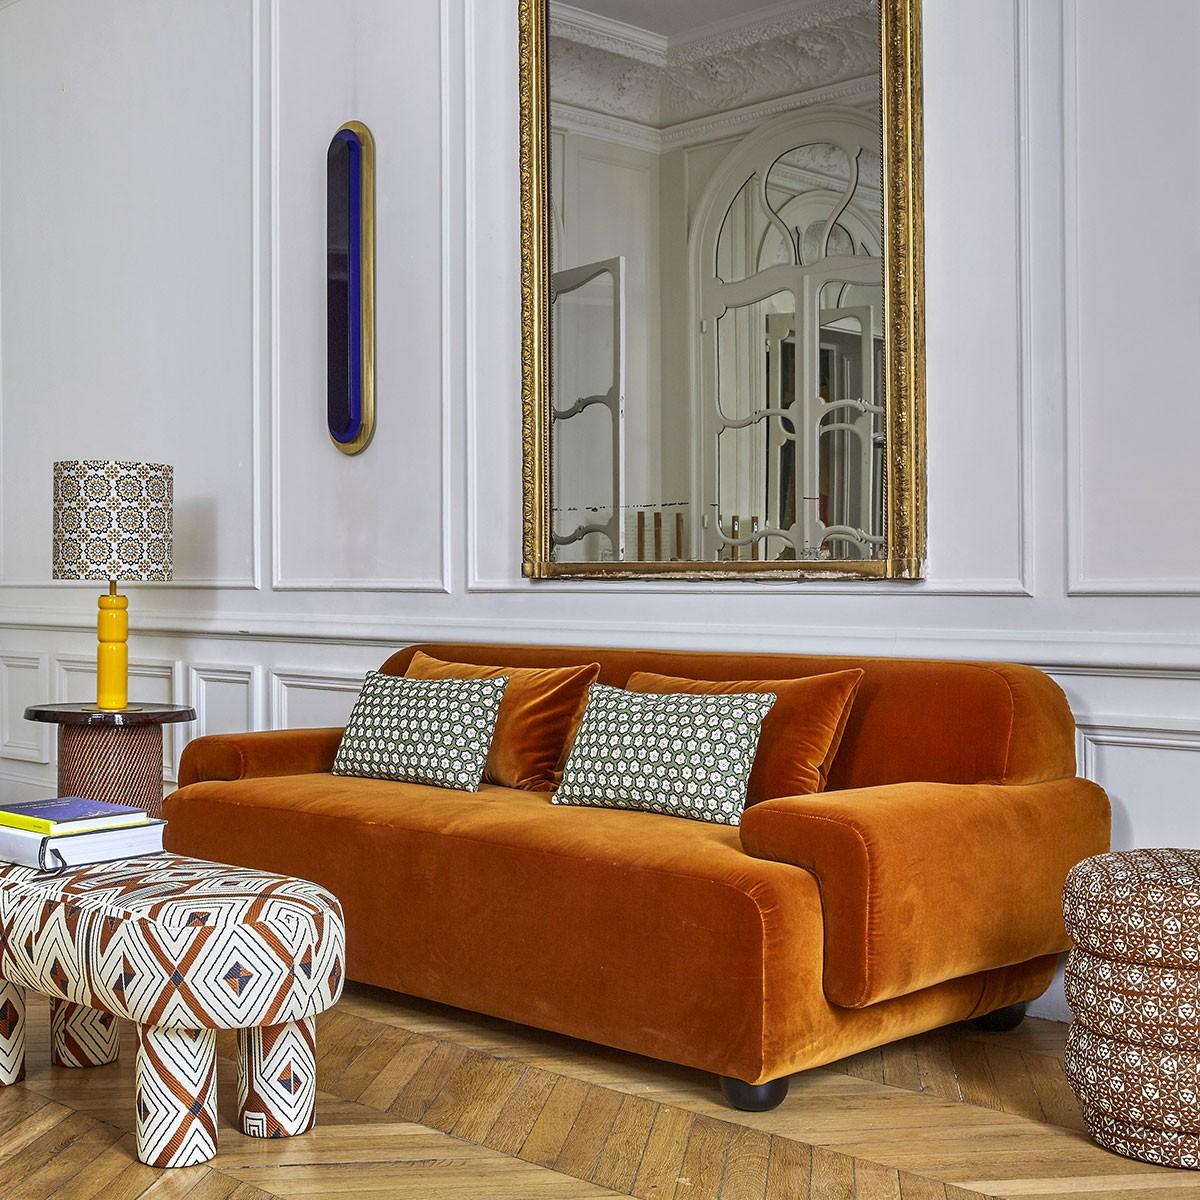 Popus Editions Lena 2.5 seater sofa in Amber Como velvet upholstery

It looks like it's straight out of a movie, with its generous curves and wide armrests. It is a real invitation to spend long Sundays with the family, comfortably seated in front